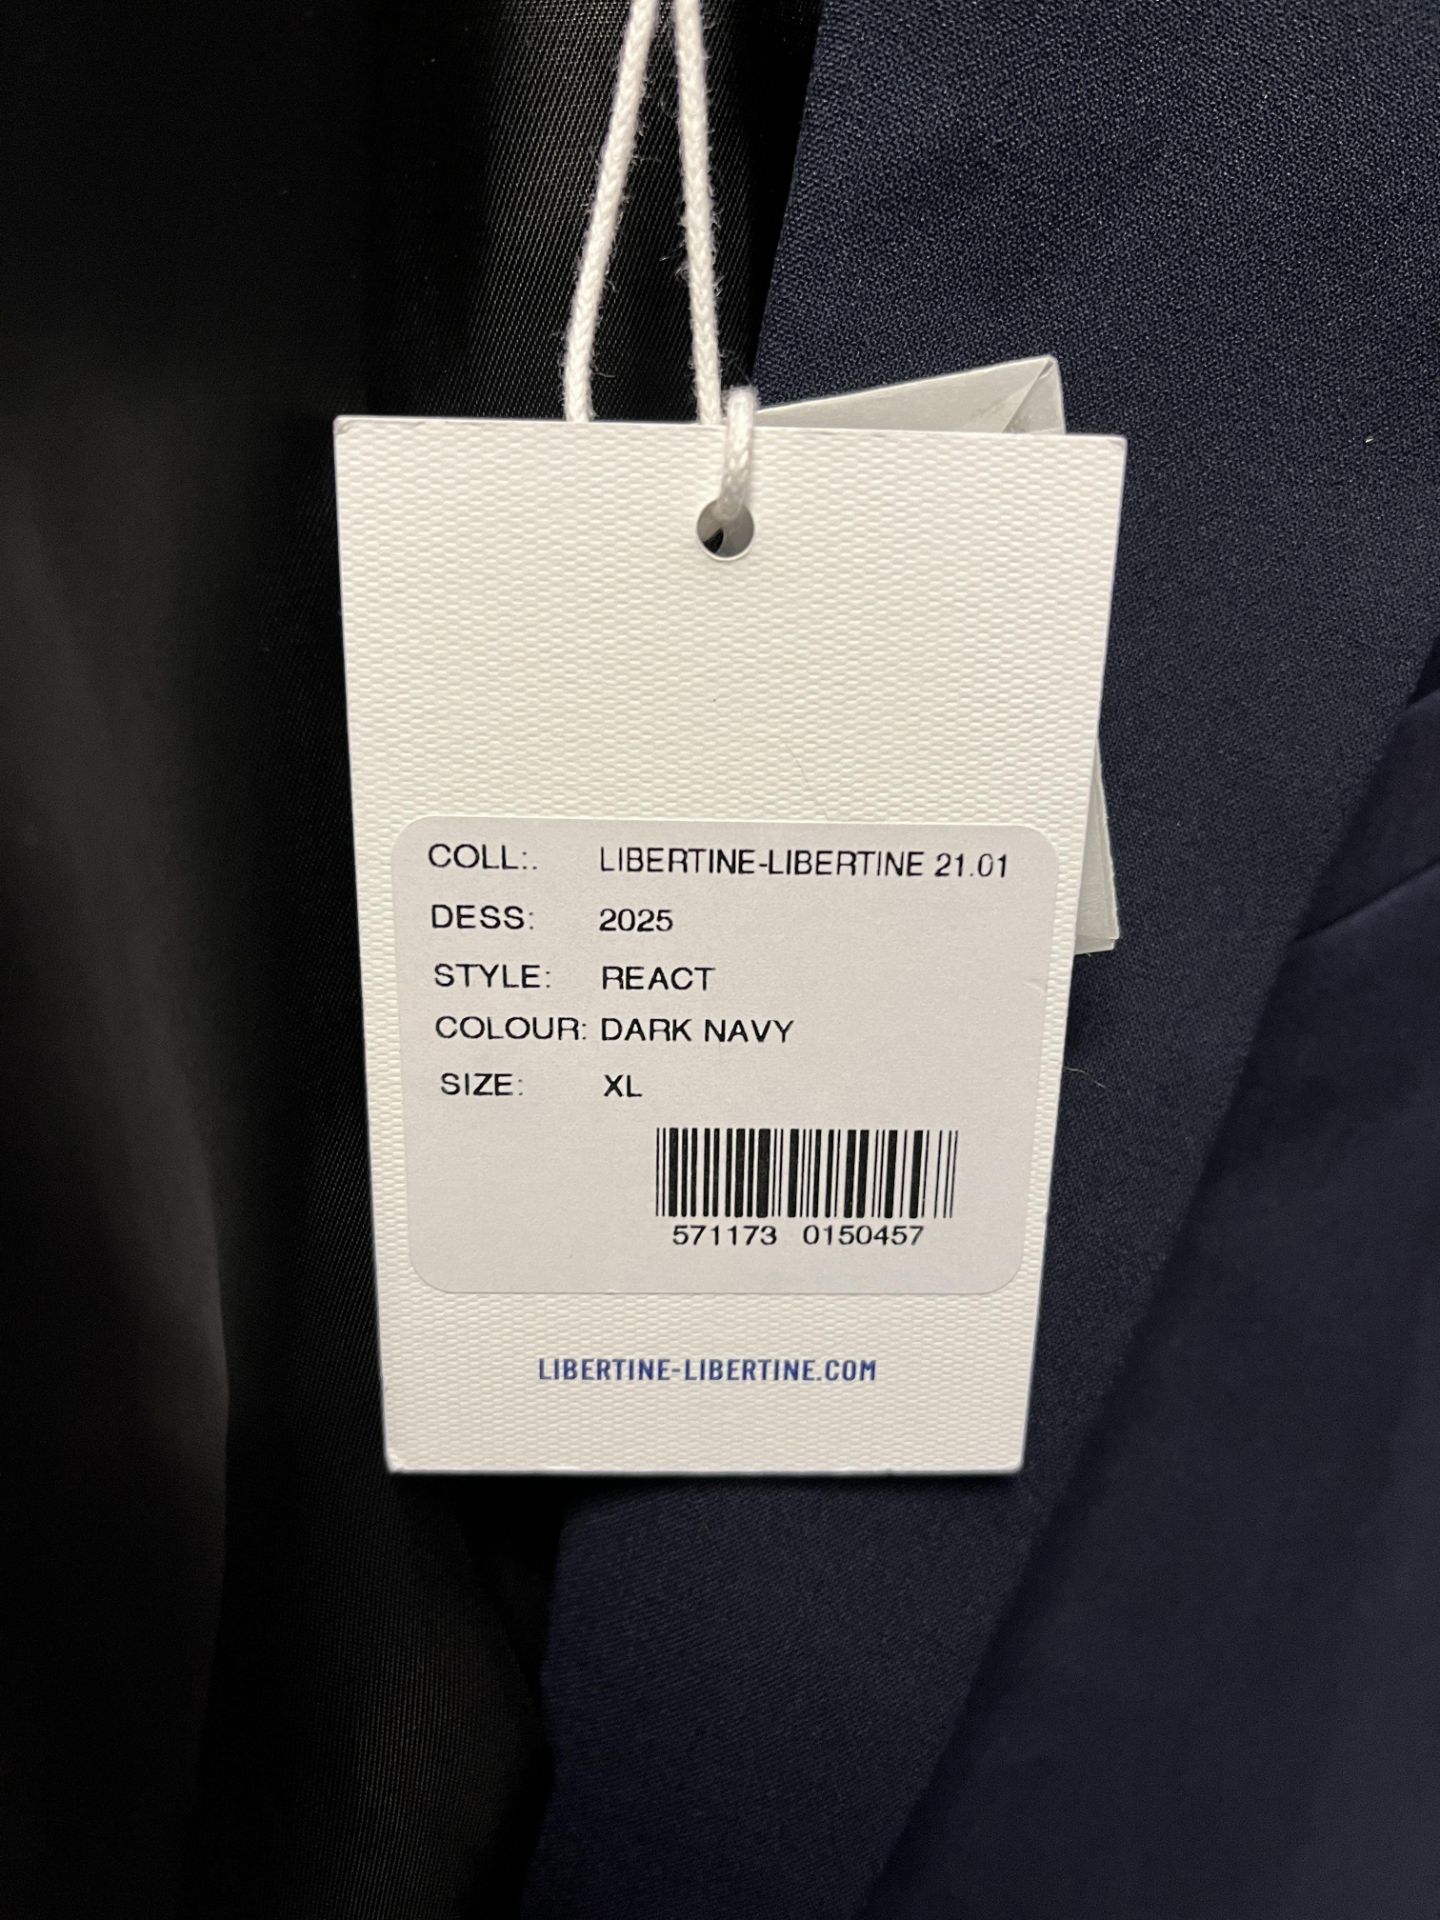 Various Libertine Men's Clothing - See Description - Image 6 of 12